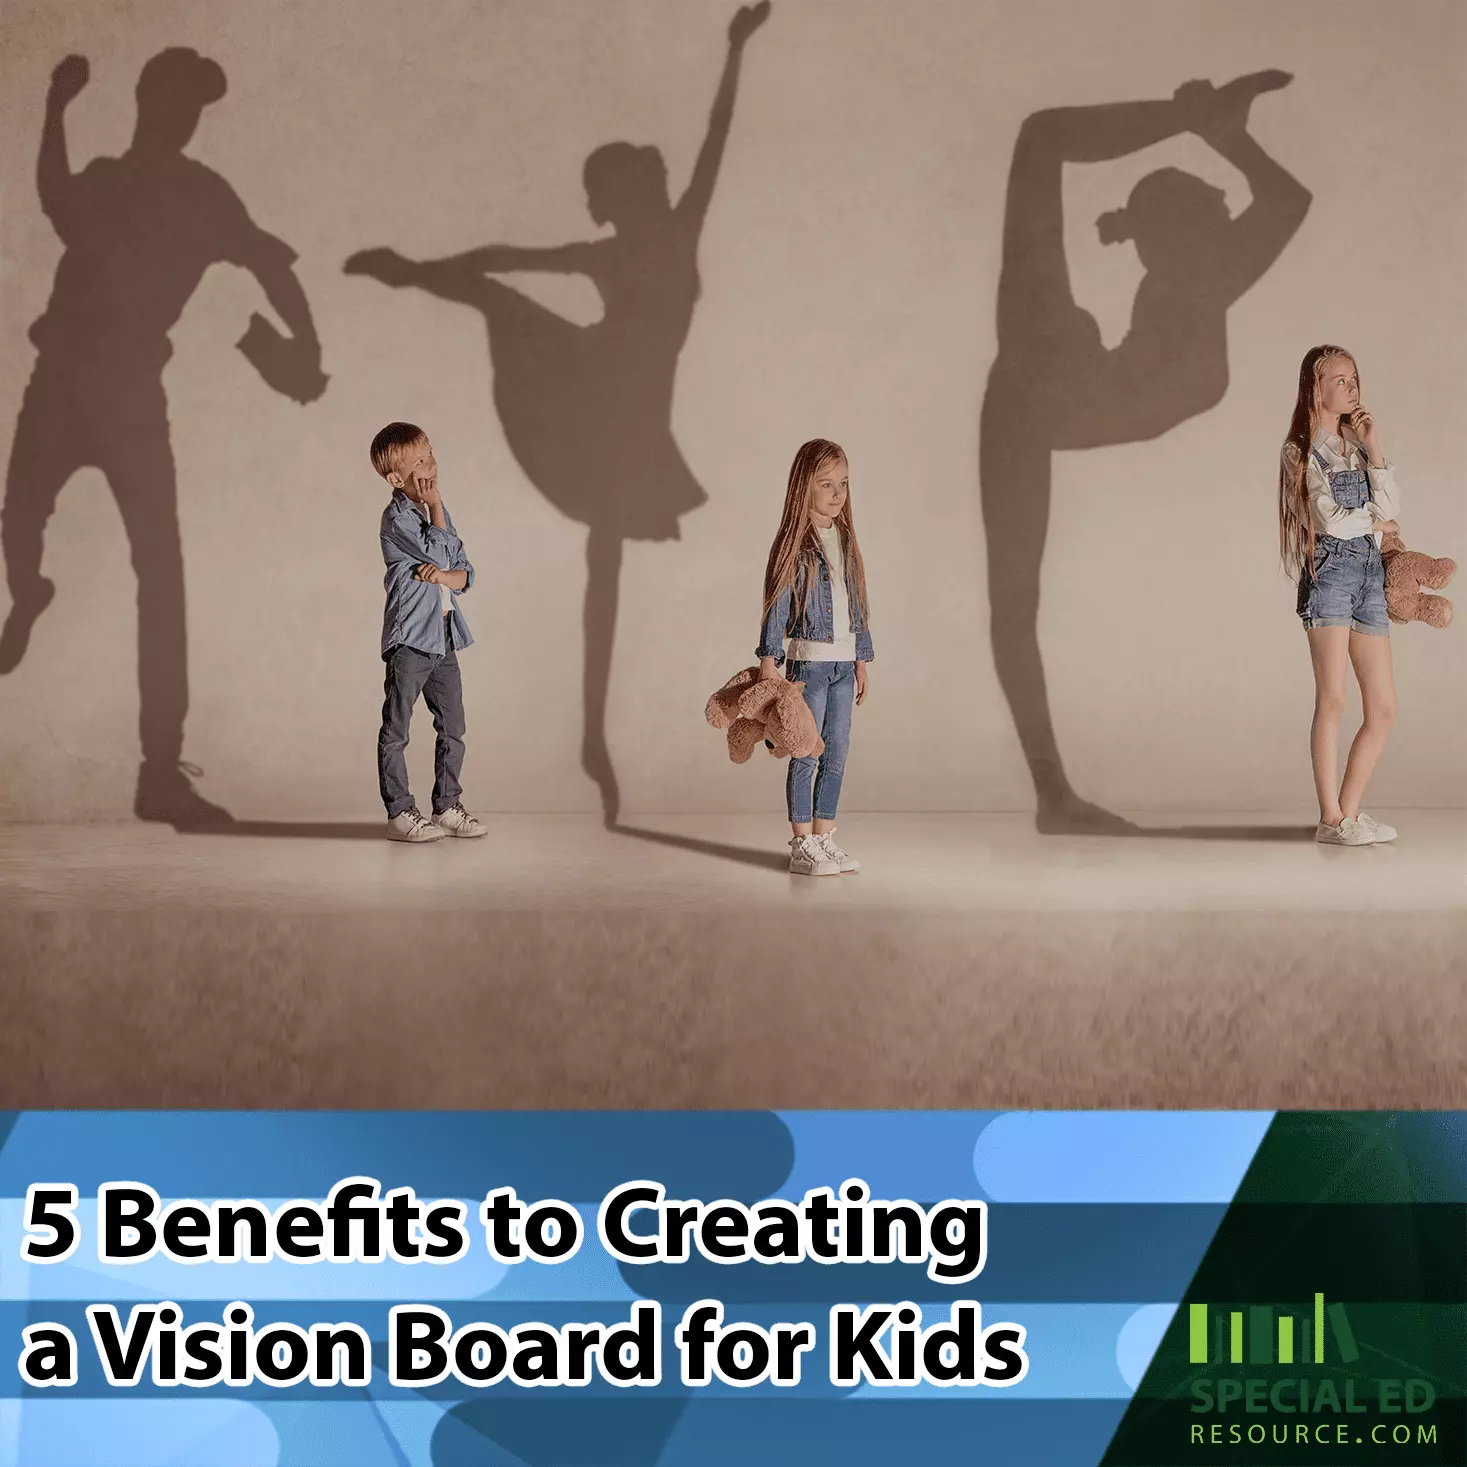 5 Benefits to Creating a Vision Board for Kids blog